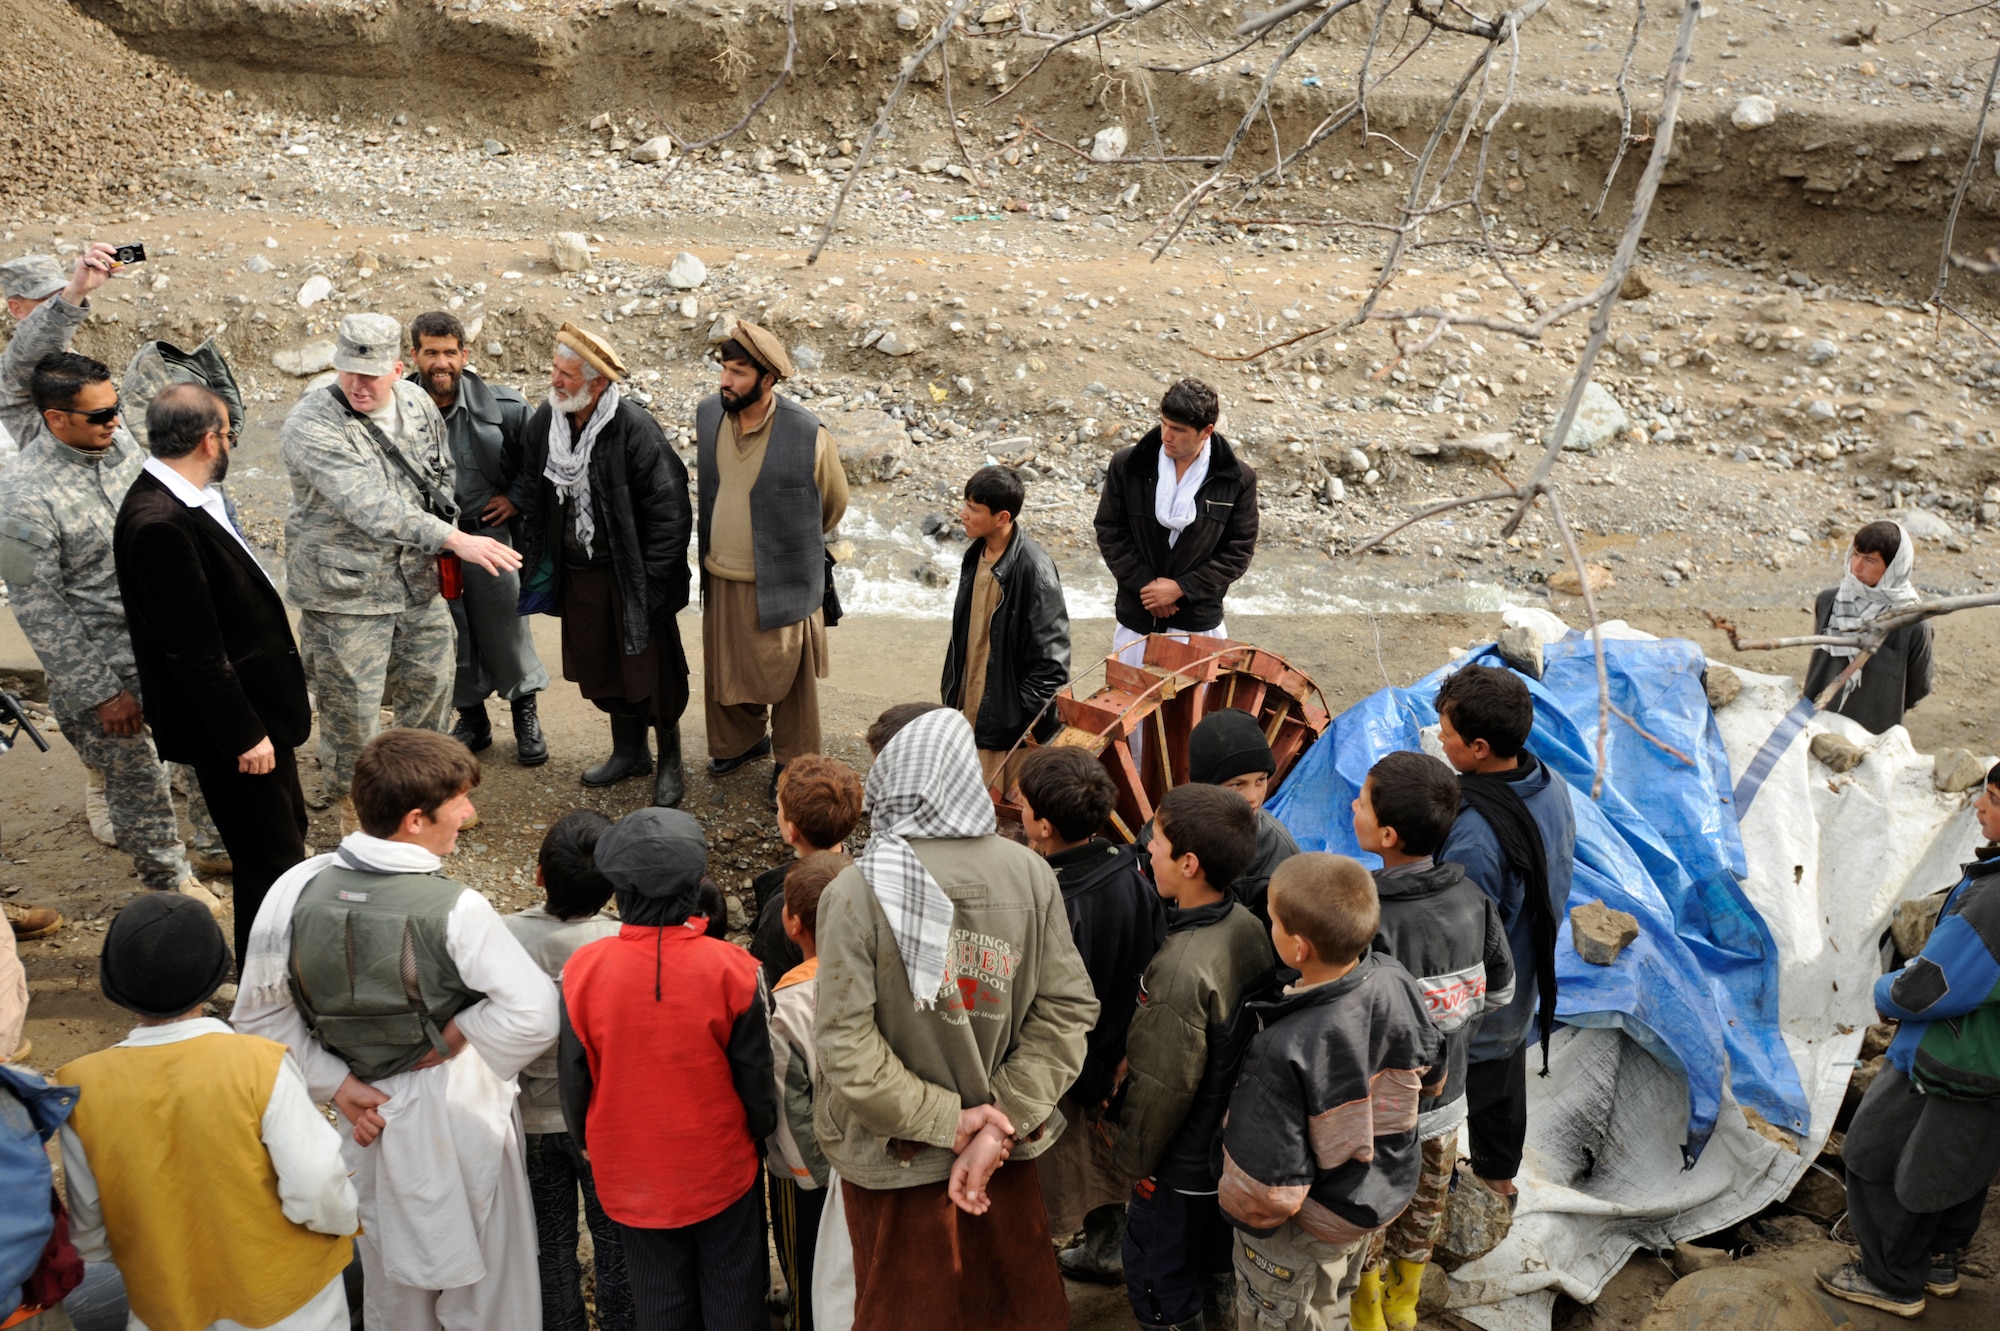 U.S. Air Force Lt. Col. Mark Stratton, Panjshir Provincial Reconstruction Team (PRT) commander, talks to villagers Mar. 4, 2009, about a Micro hydro pump provided by the Panjshir PRT in Afghanistan.  The micro hydro uses water to create power for the village. (U.S. Air Force photo by Staff Sgt. James L. Harper Jr.)Released